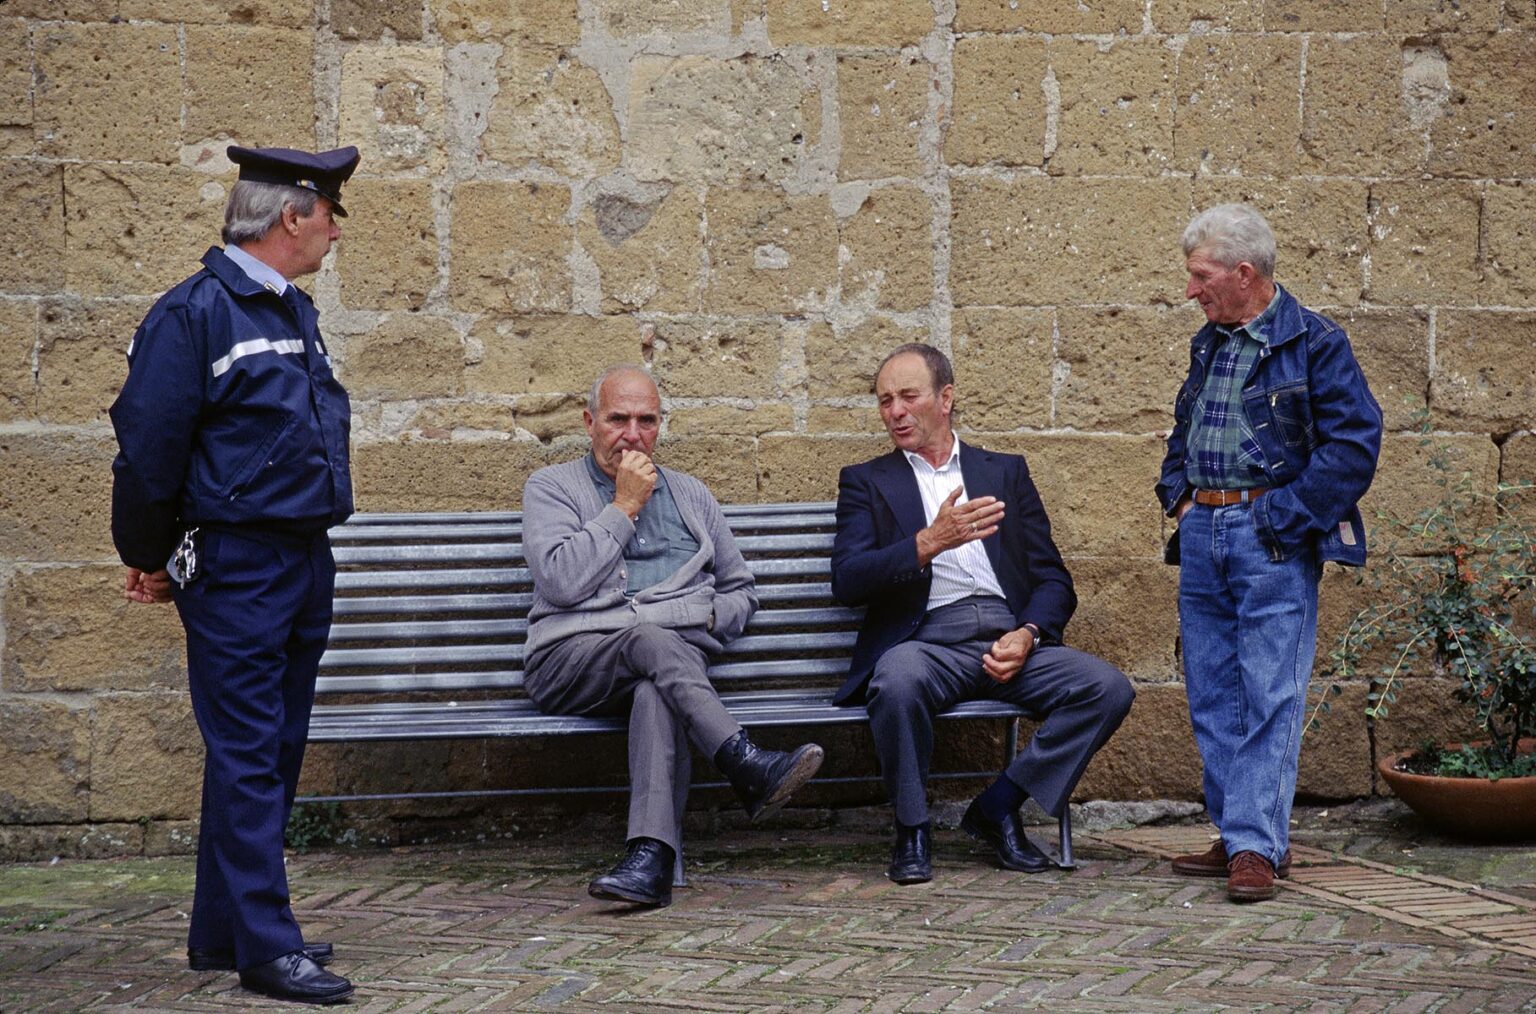 Policeman and local Italians visit in the town of SOVANA (Medieval town recently restored) - TUSCANY, ITALY